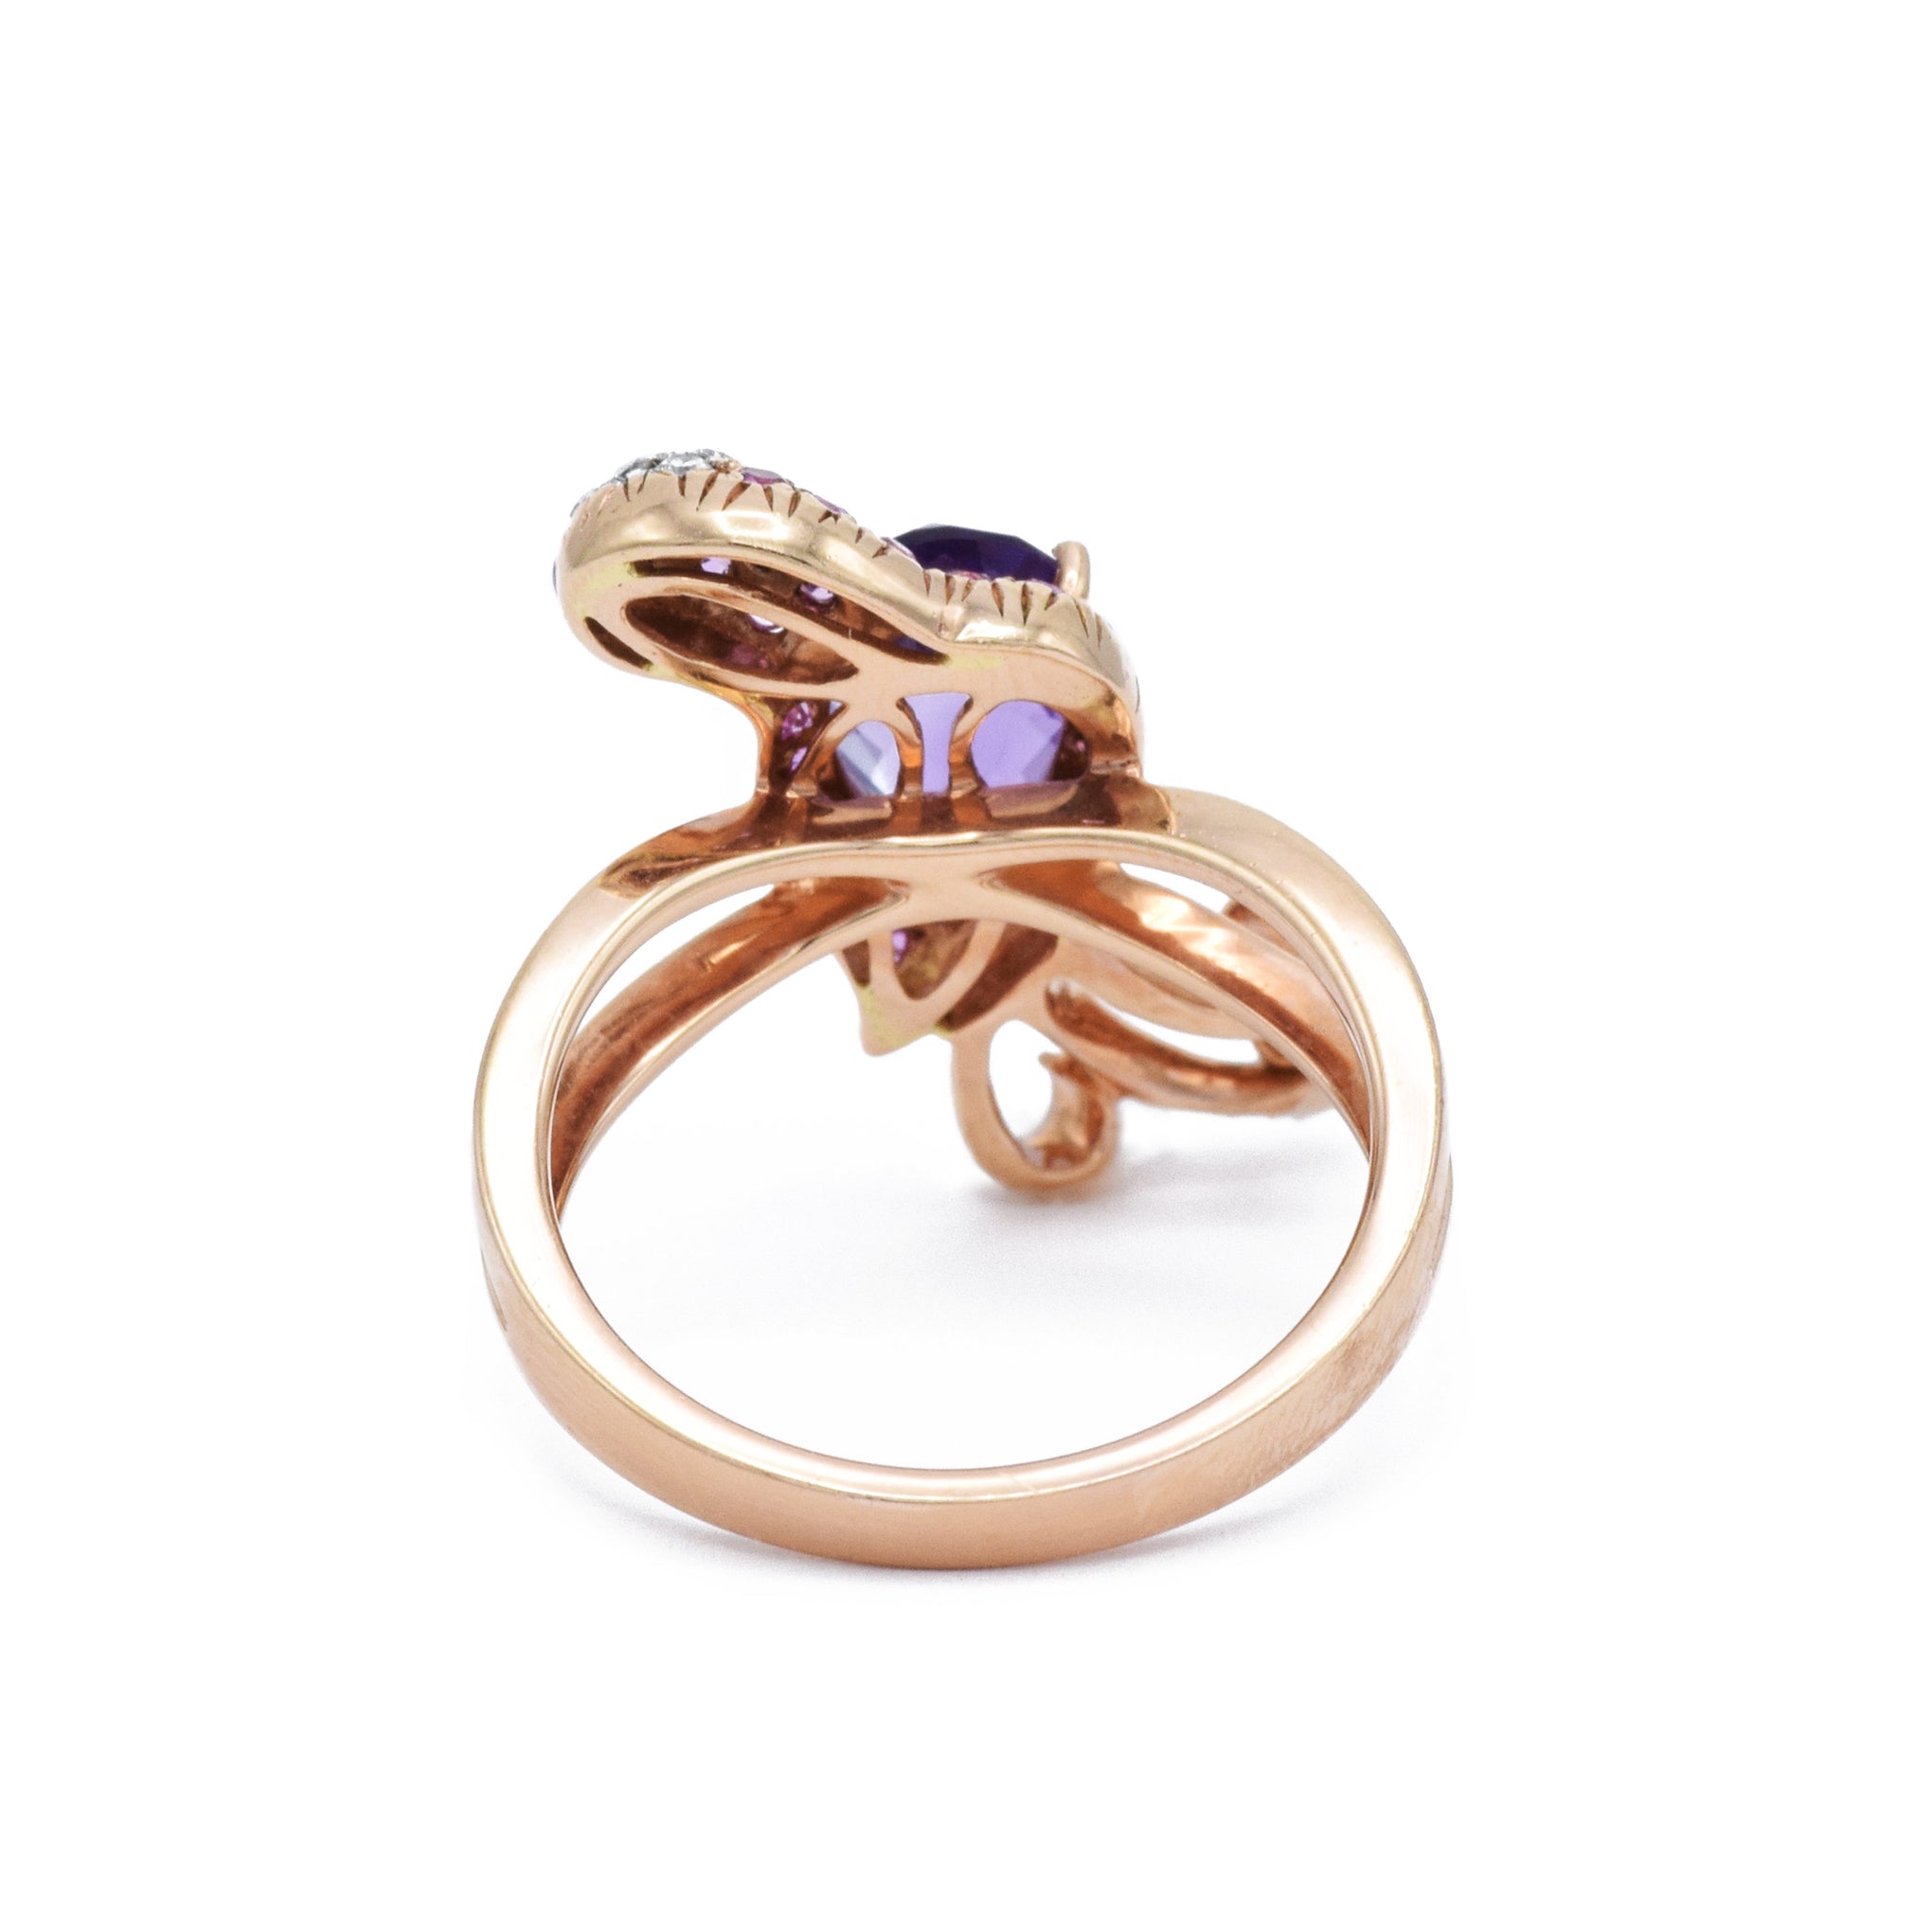 Parrot Ring with Amethyst, Sapphires, and Diamonds